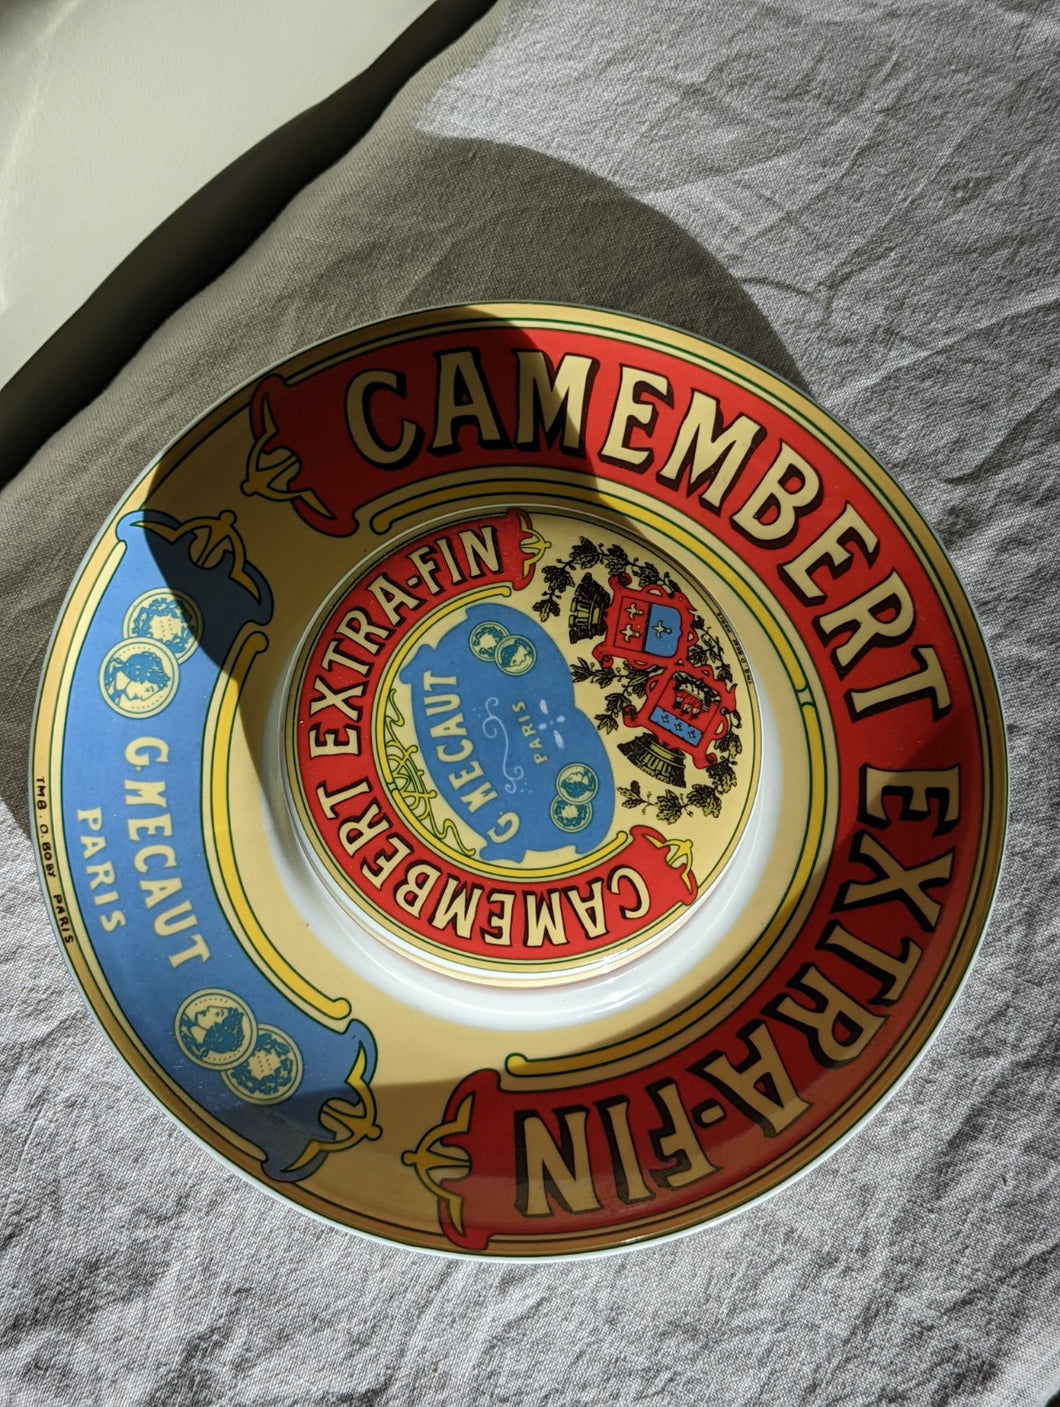 French camembert serving dish